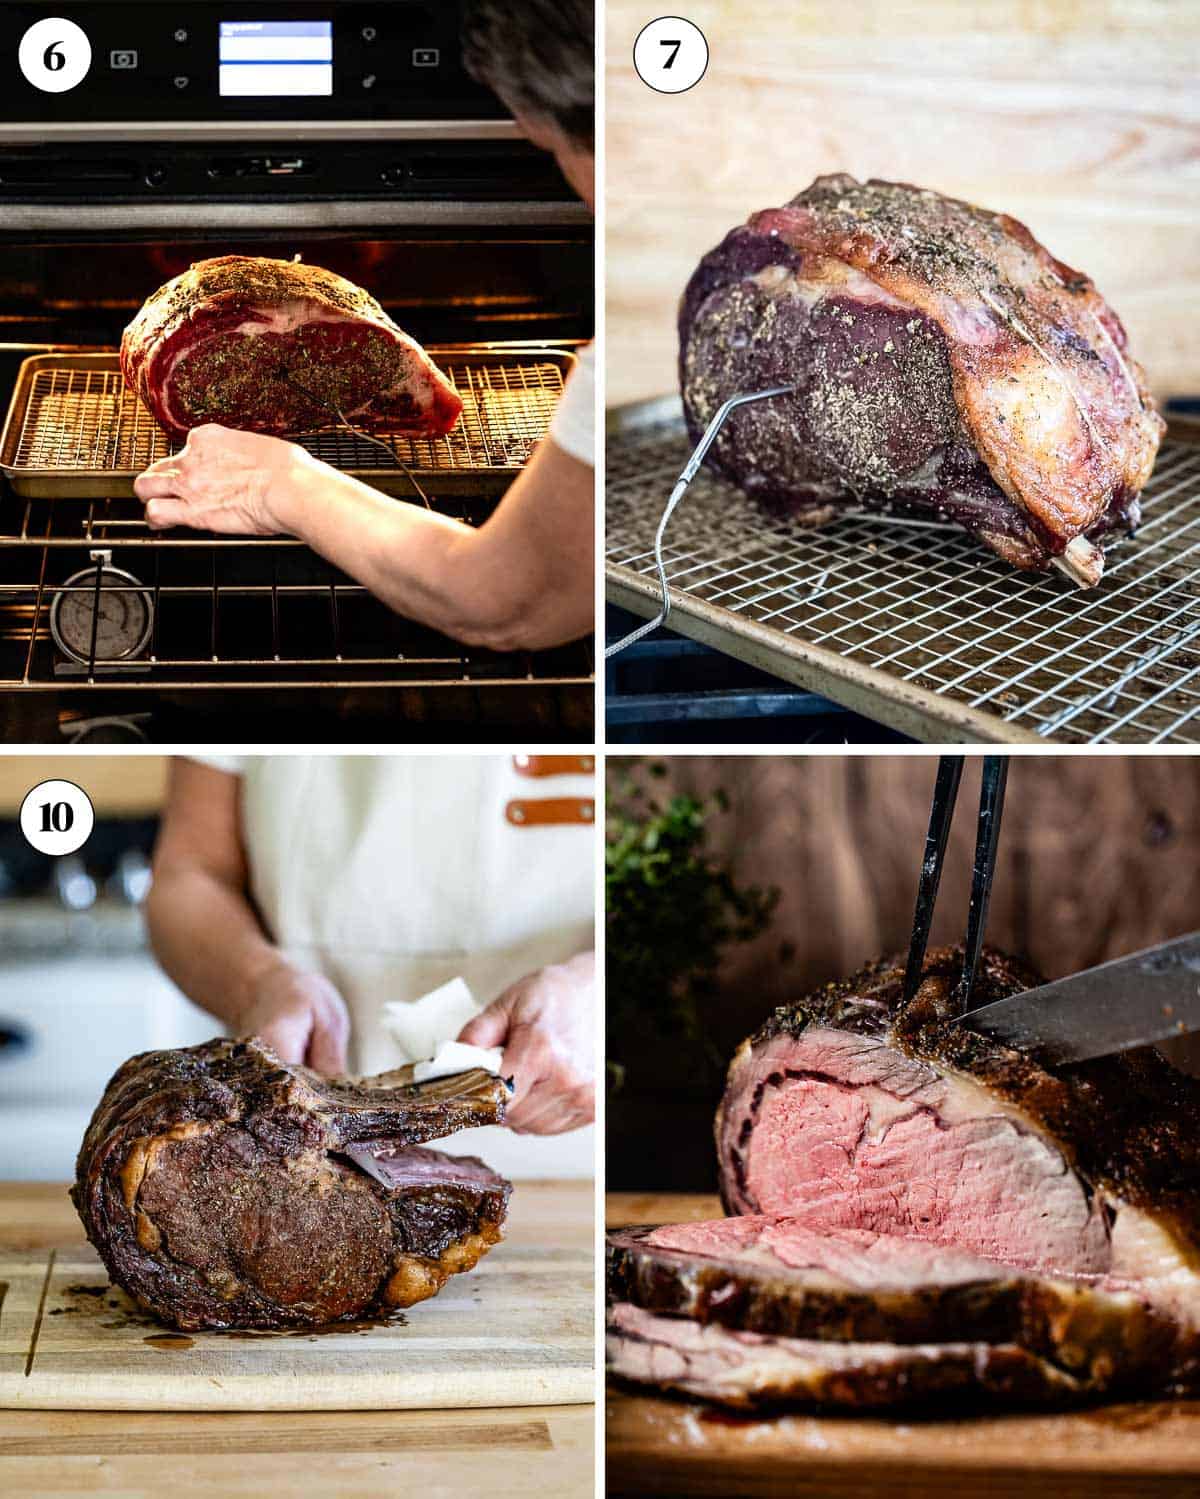 A collage of images showing how to slow cook a ribeye roast in the oven using the reverse searing method.